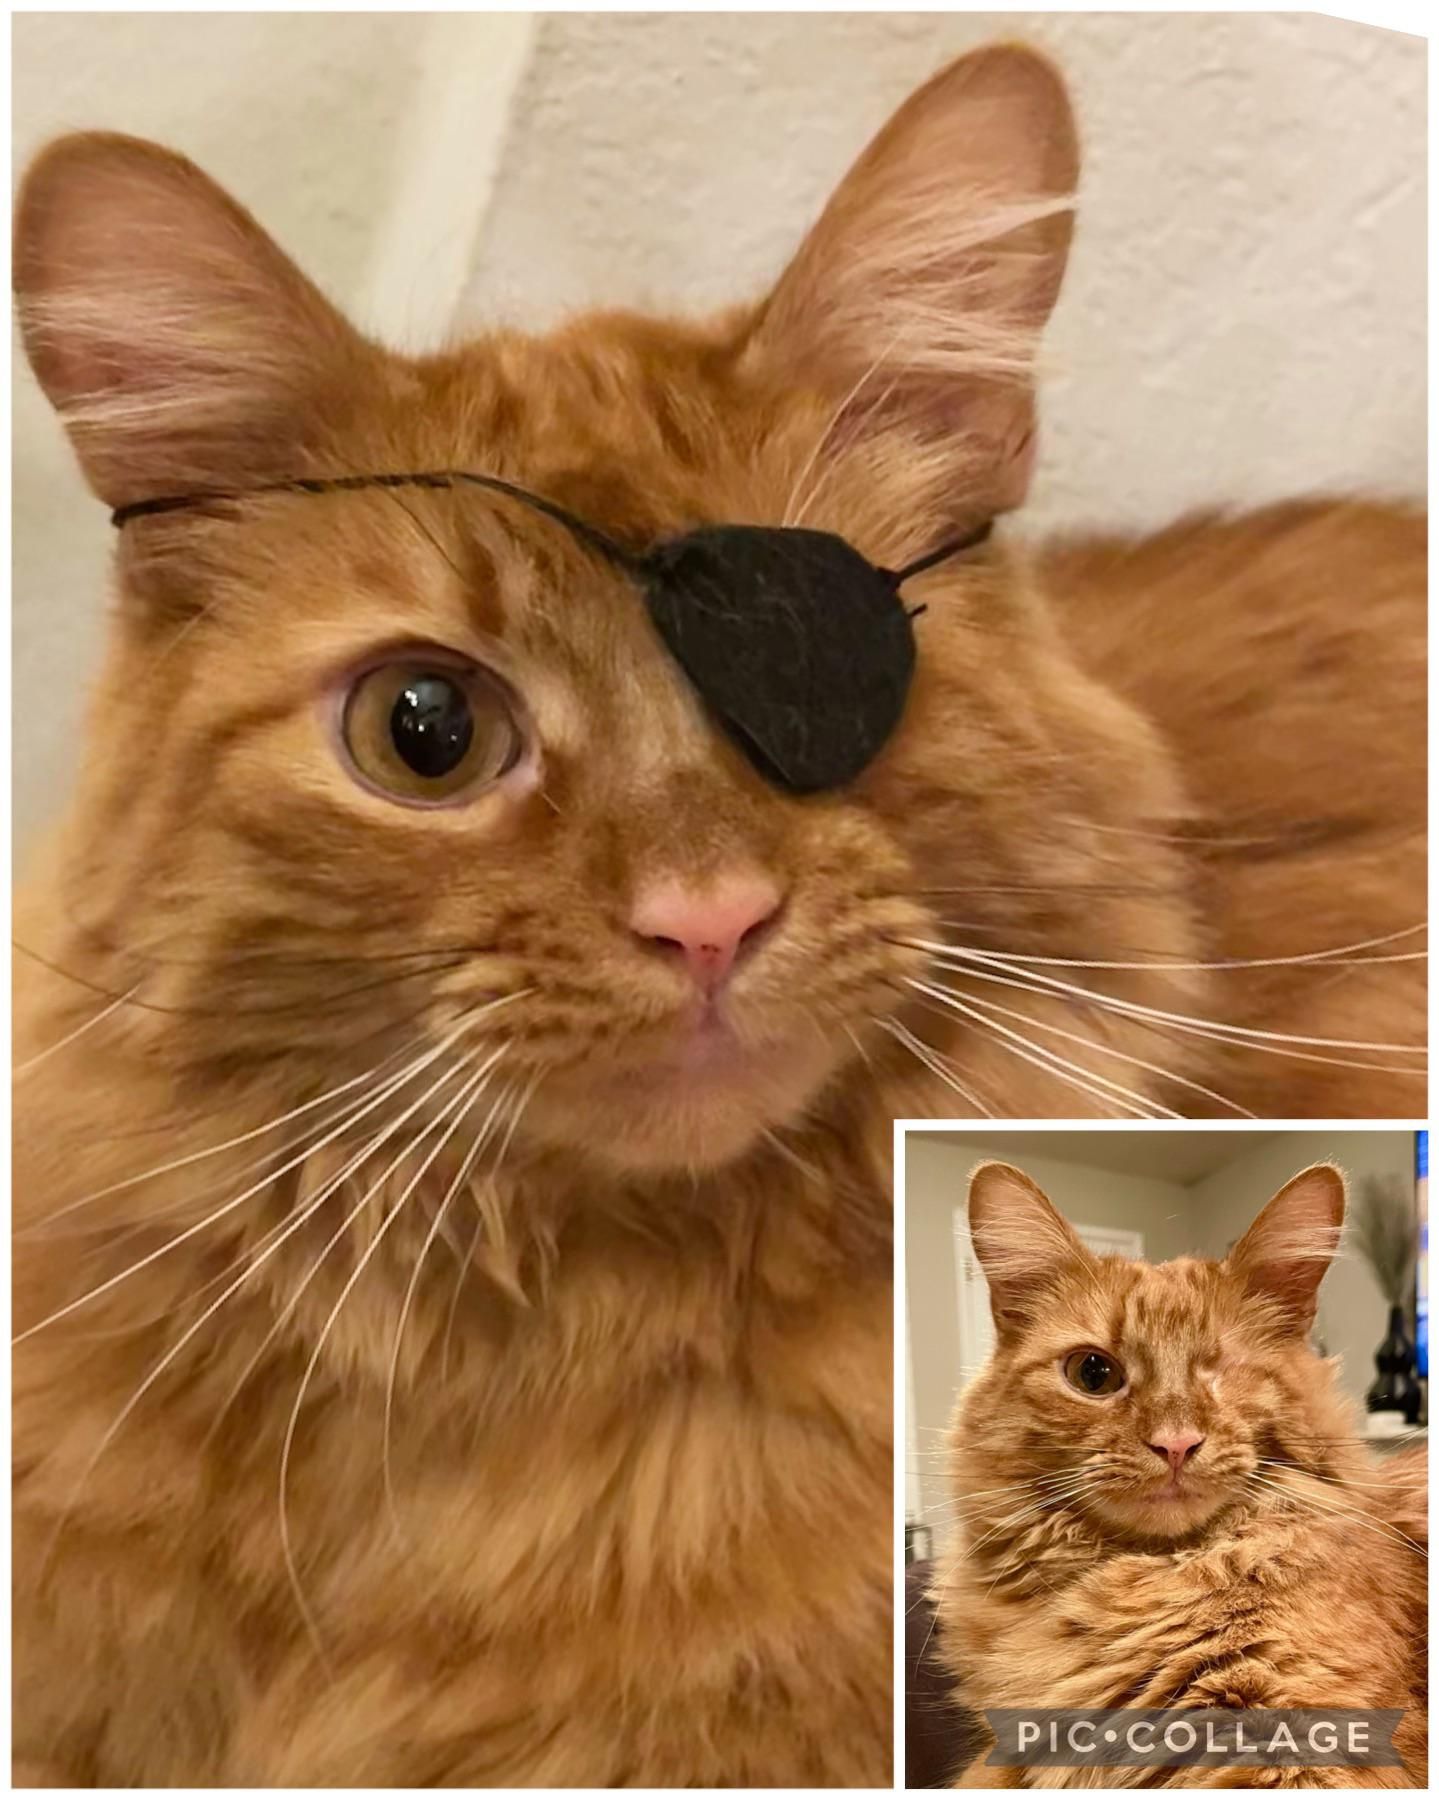 I made my cat an eyepatch and he rocked it.